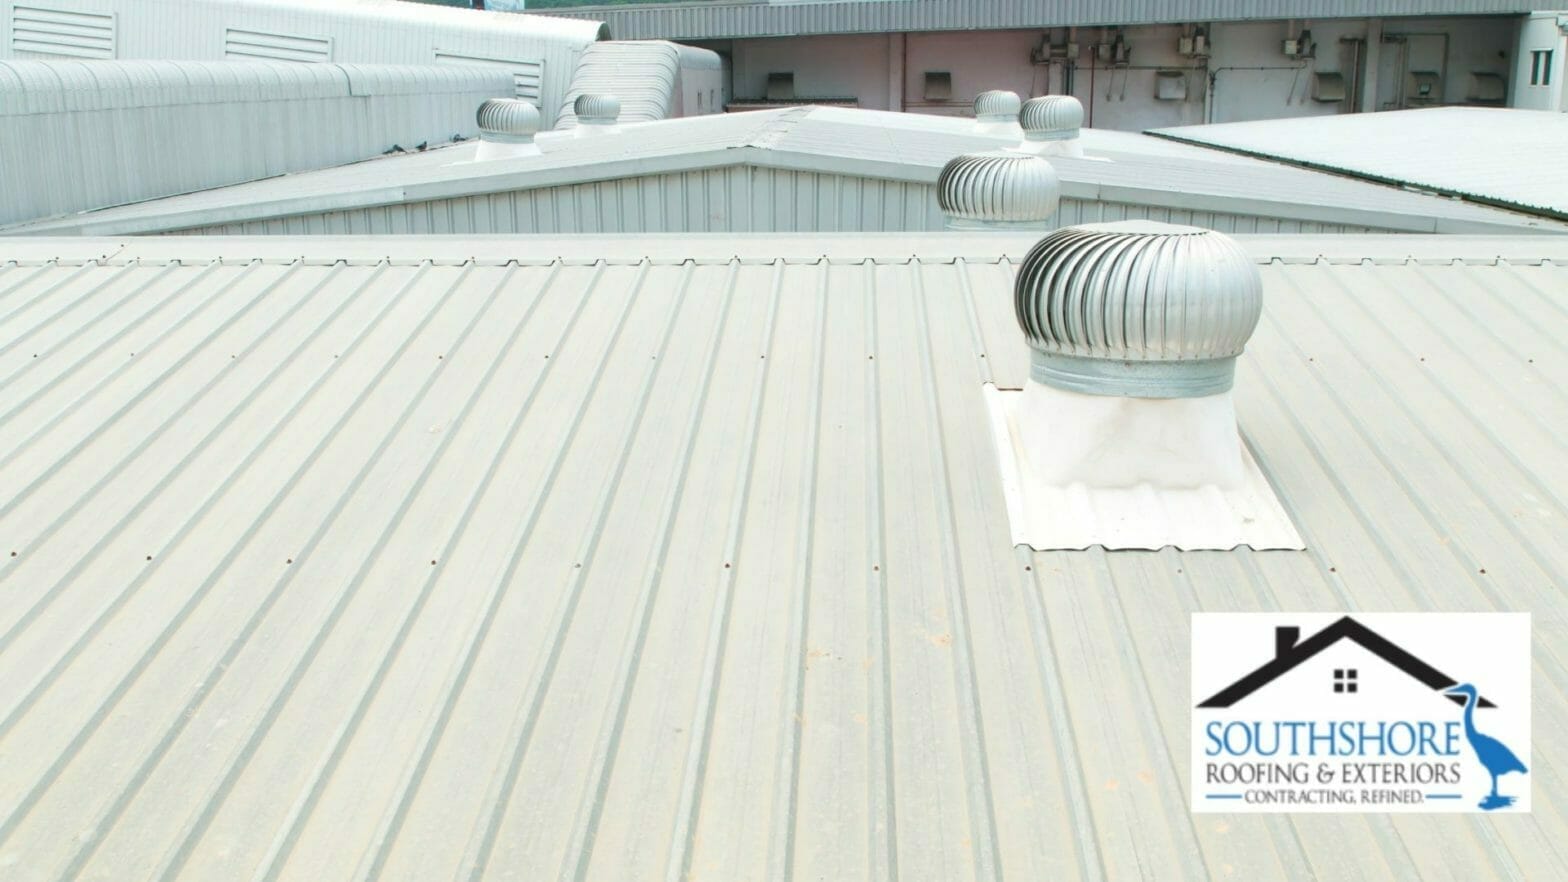 Top Commercial Roofing Companies in Tampa Bay